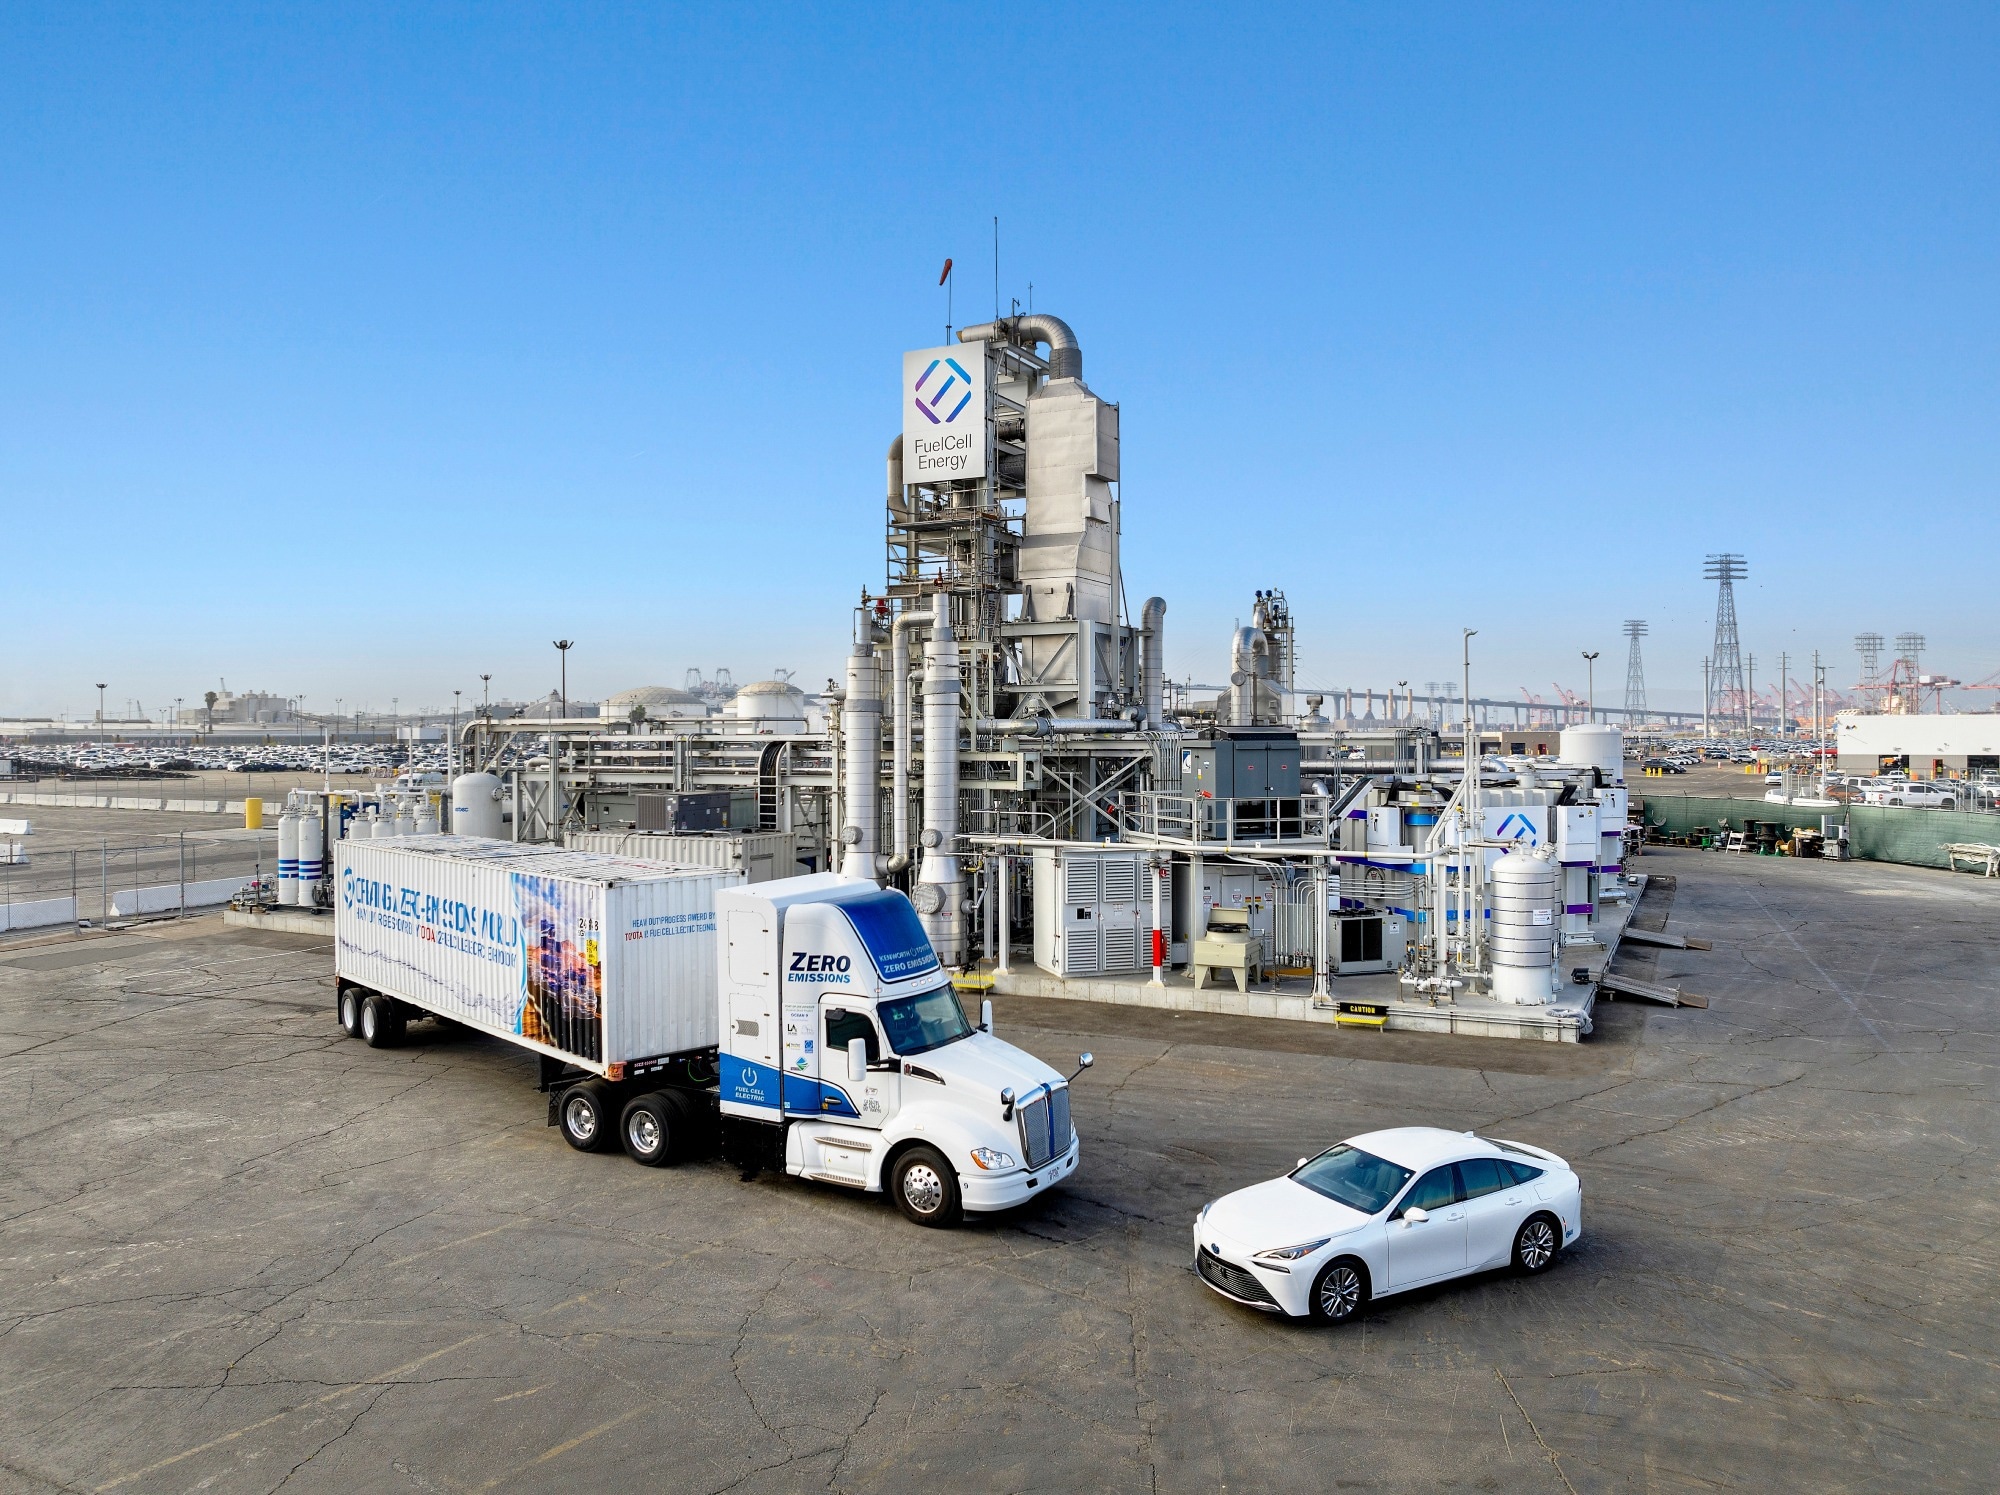 How is Toyota and FuelCell Energy